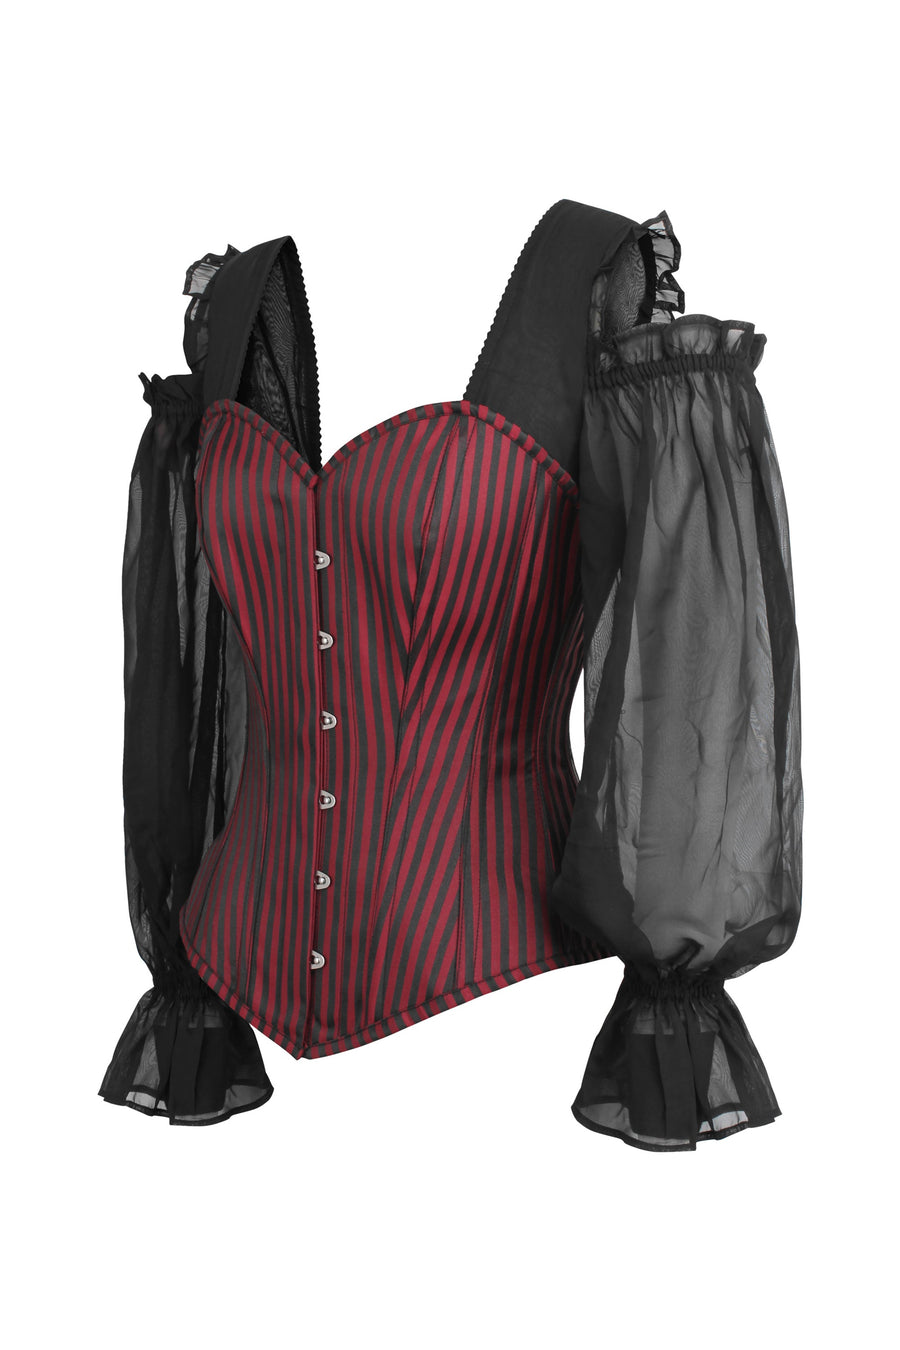 Long Sleeve Red and Black Striped Overbust Corset with Chiffon Sleeves